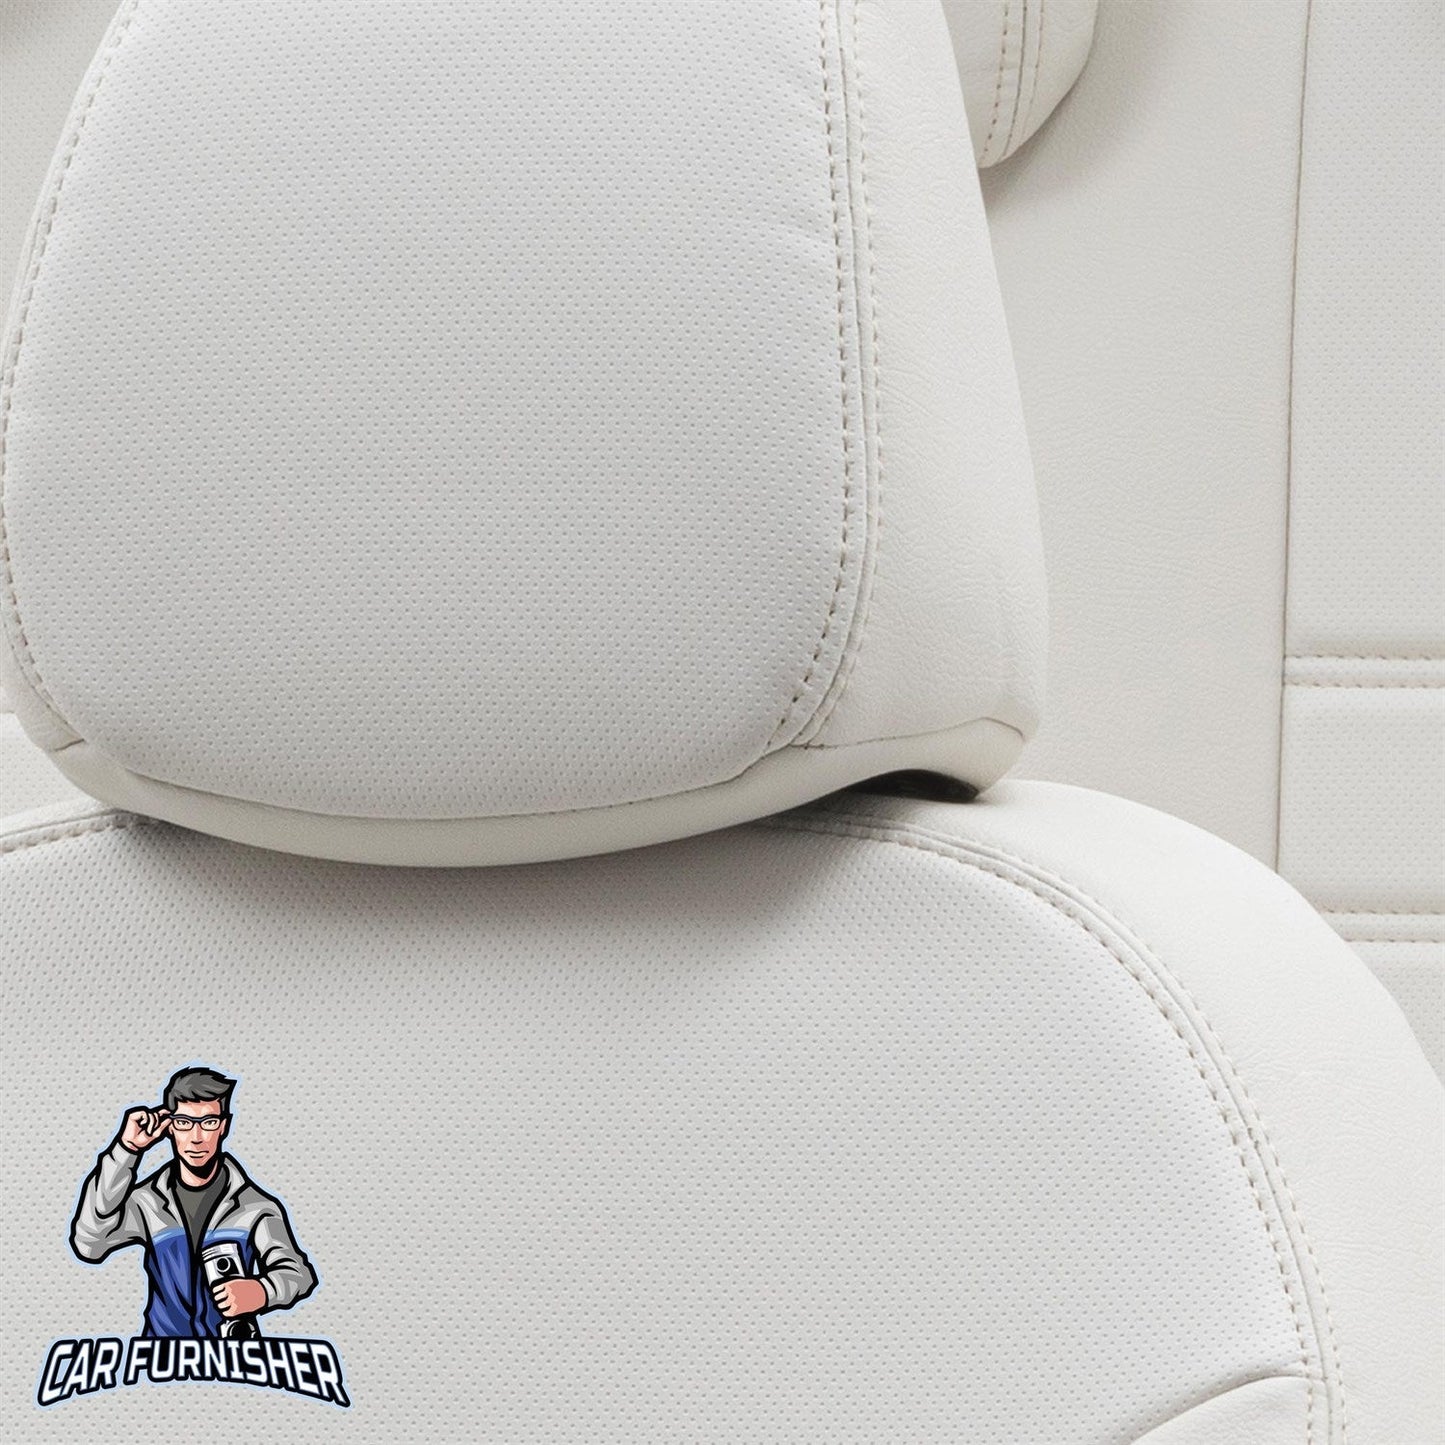 Seat Arona Seat Covers Istanbul Leather Design Ivory Leather